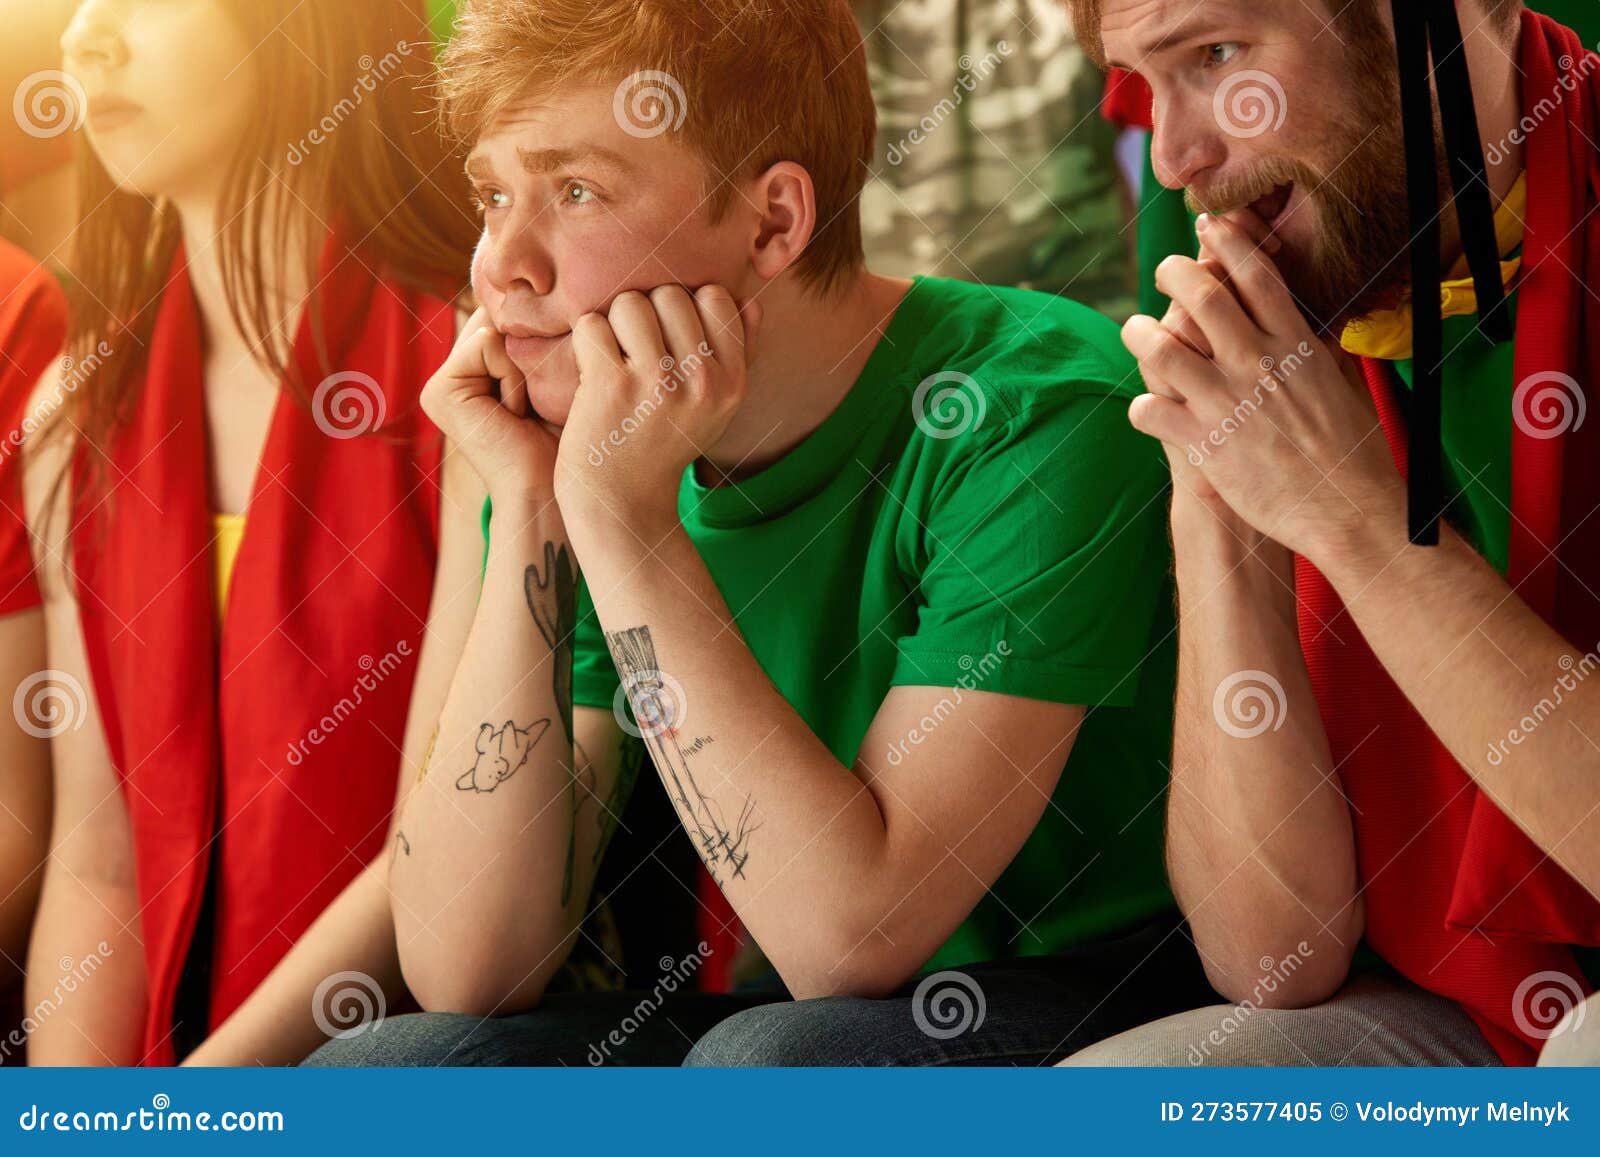 Tense Game Moment Sport Fans Emotionally Watching Portugal Football